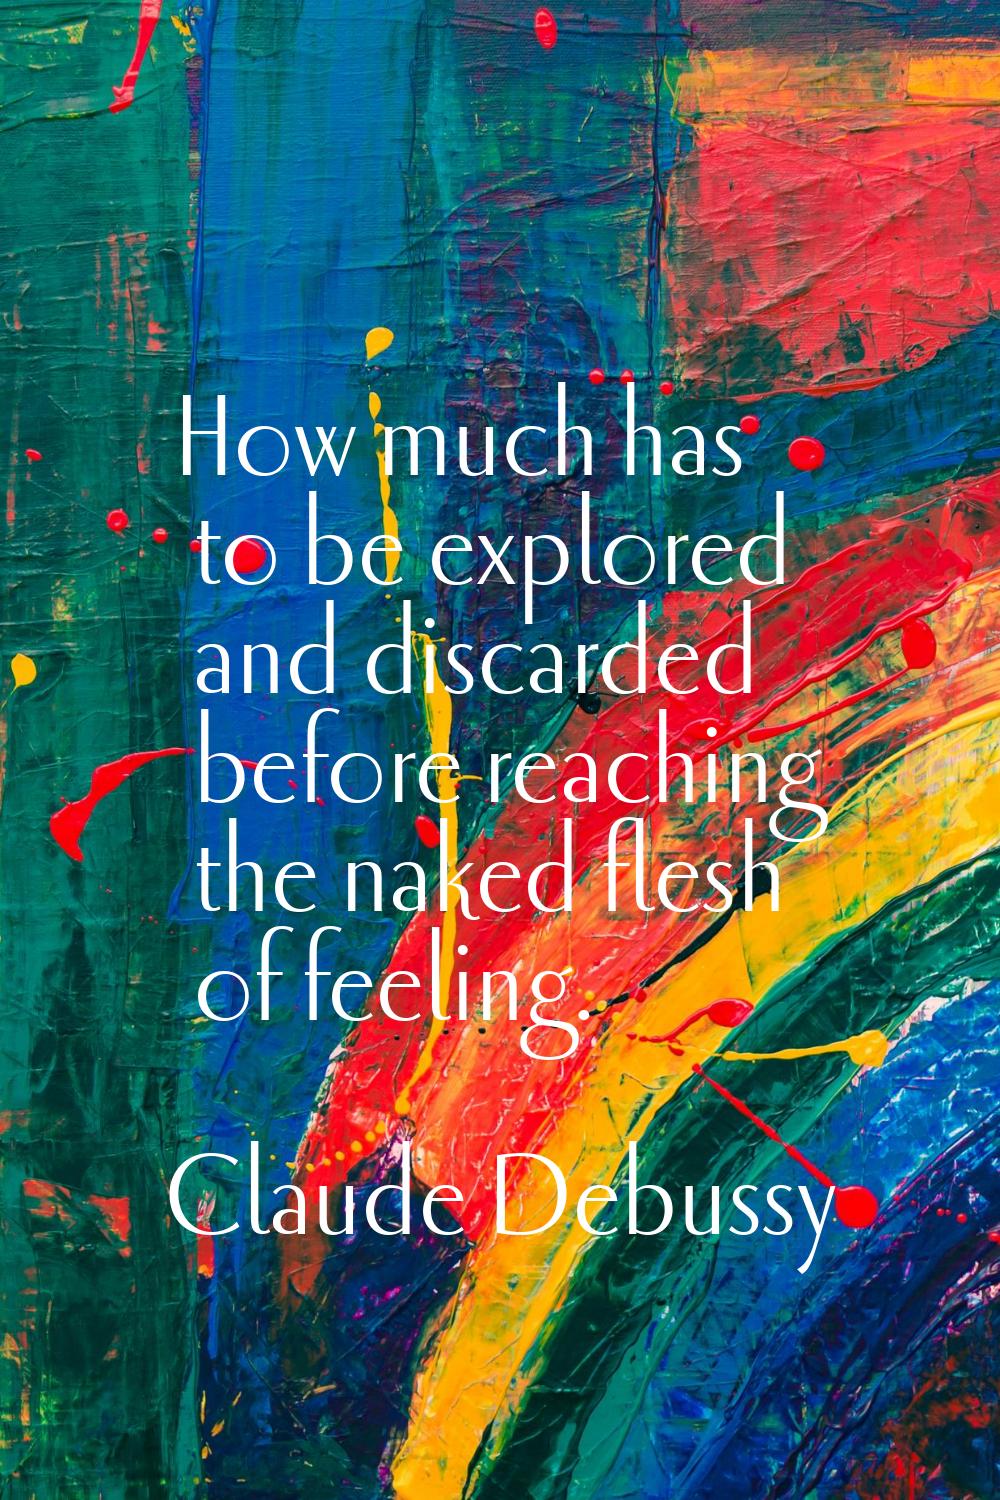 How much has to be explored and discarded before reaching the naked flesh of feeling.